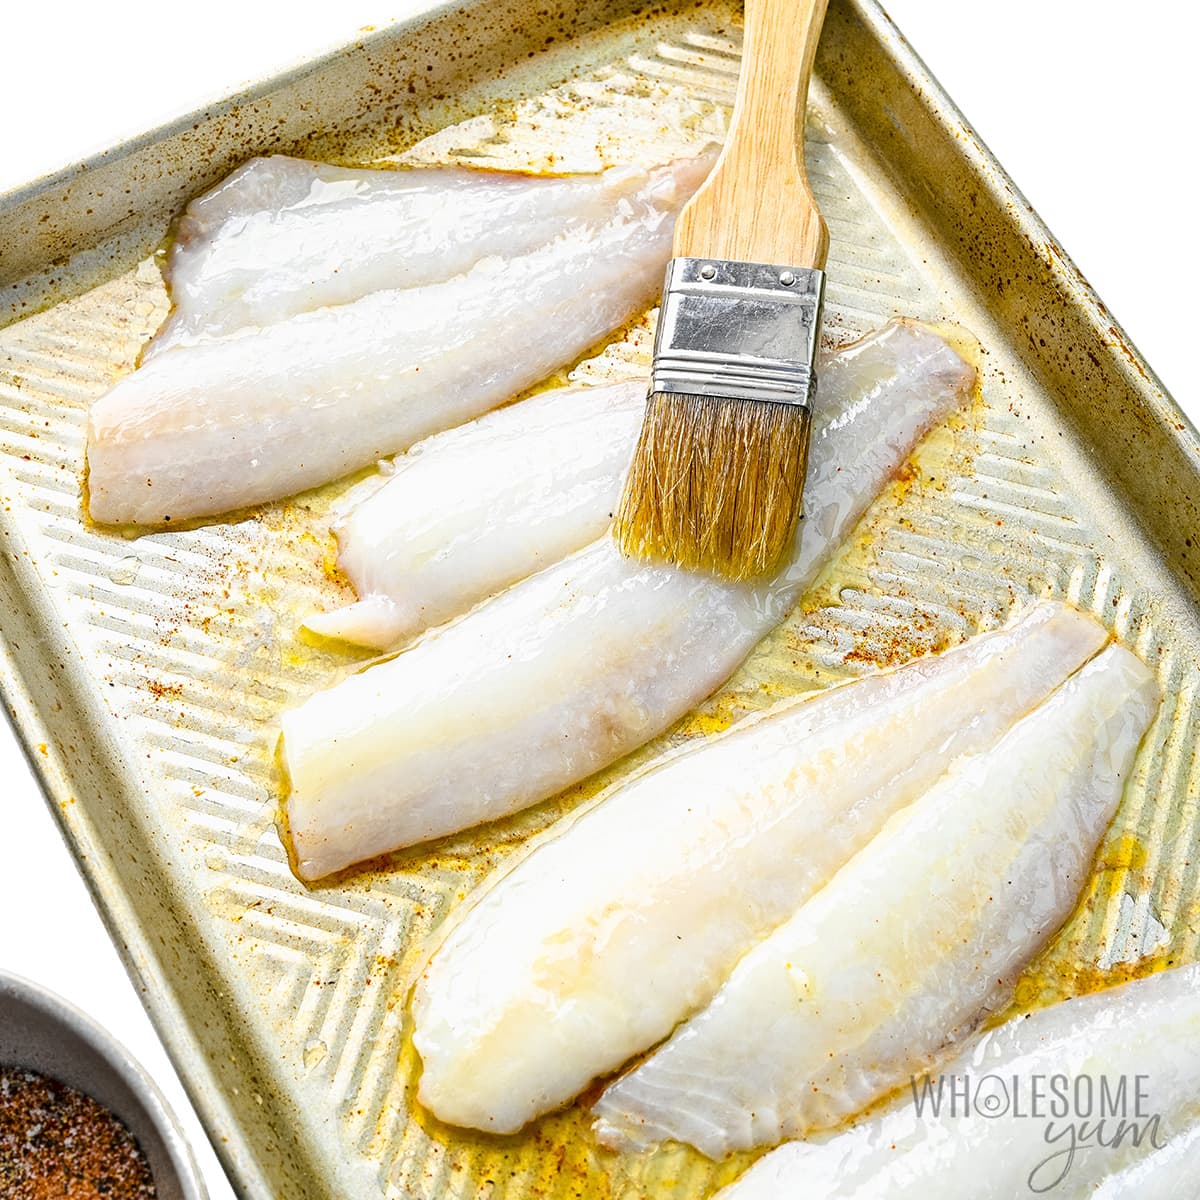 Butter mixture brushed on fish.